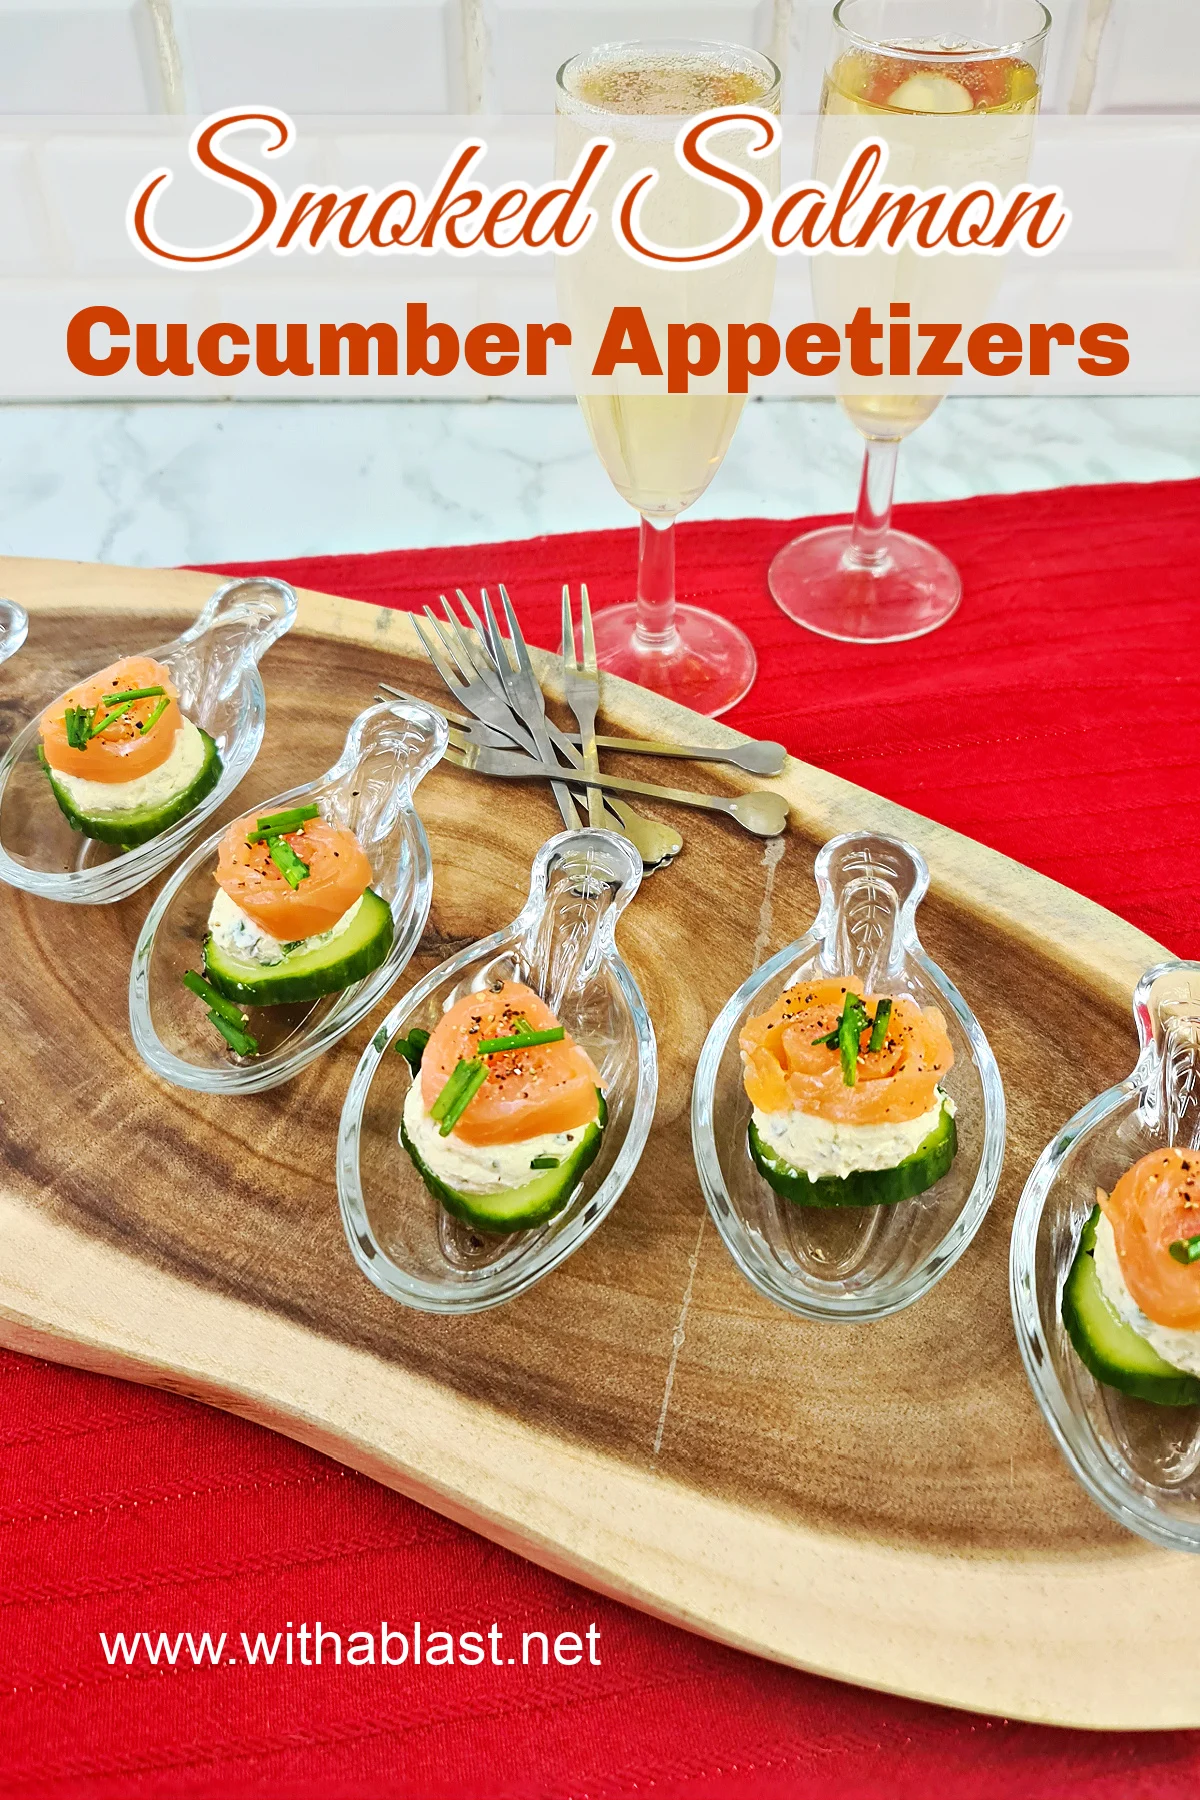 Smoked Salmon Cucumber Appetizers